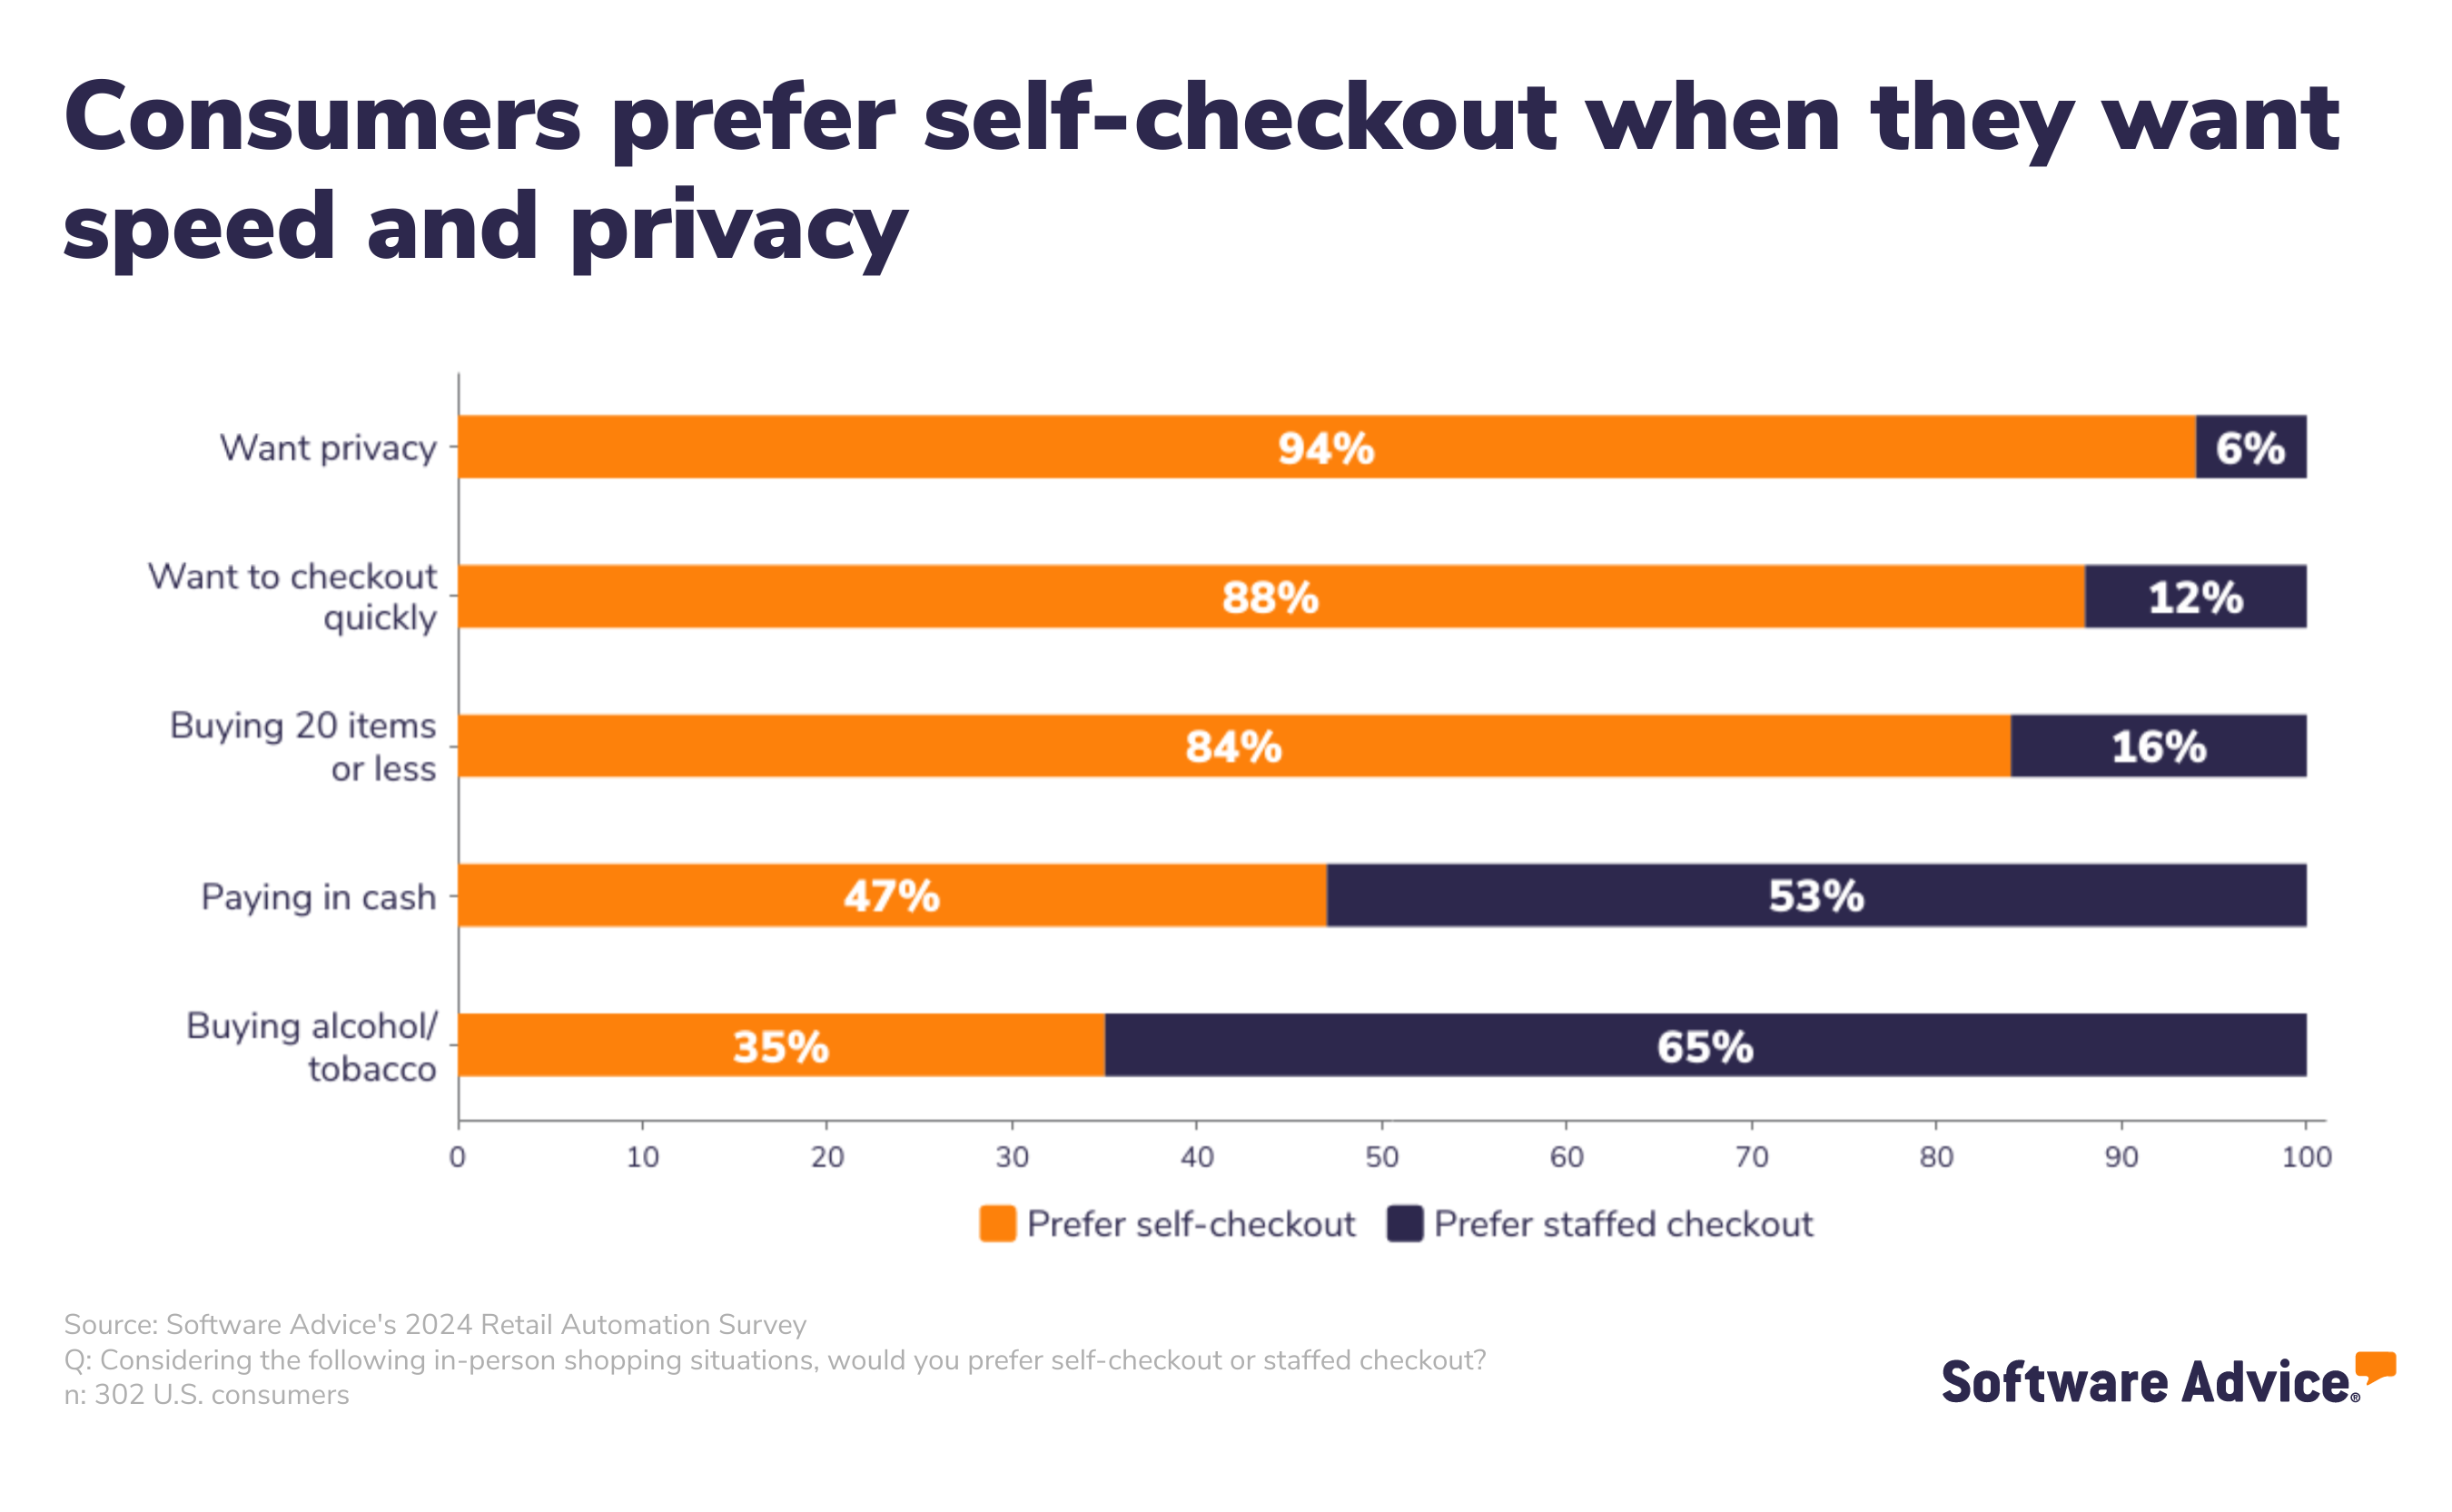 SA bar chart showing what percentage of consumers that prefer self-checkout for specific reasons and those who prefer staffed